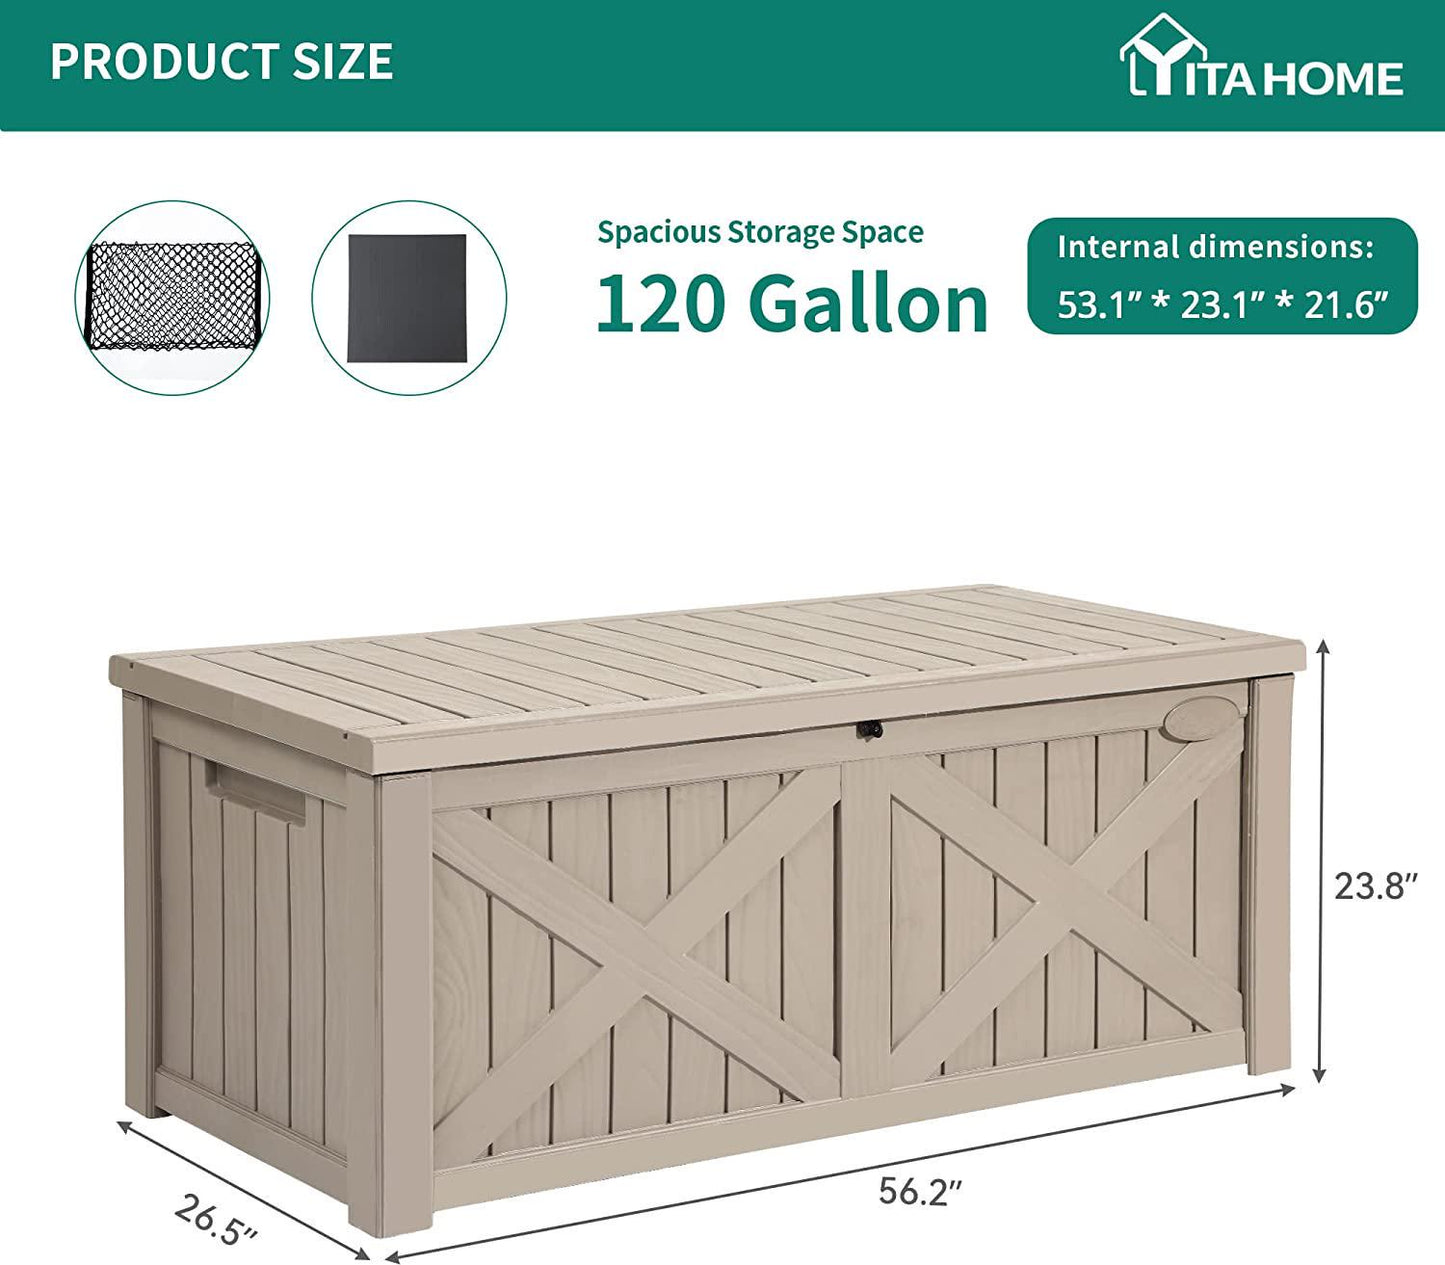 120 Gallon Large Deck Box w/Flexible Divider and Storage Net, Resin Outdoor Storage Boxes, Waterproof Cushion Storage Bench for Patio, Pool Supplies, Garden Tools